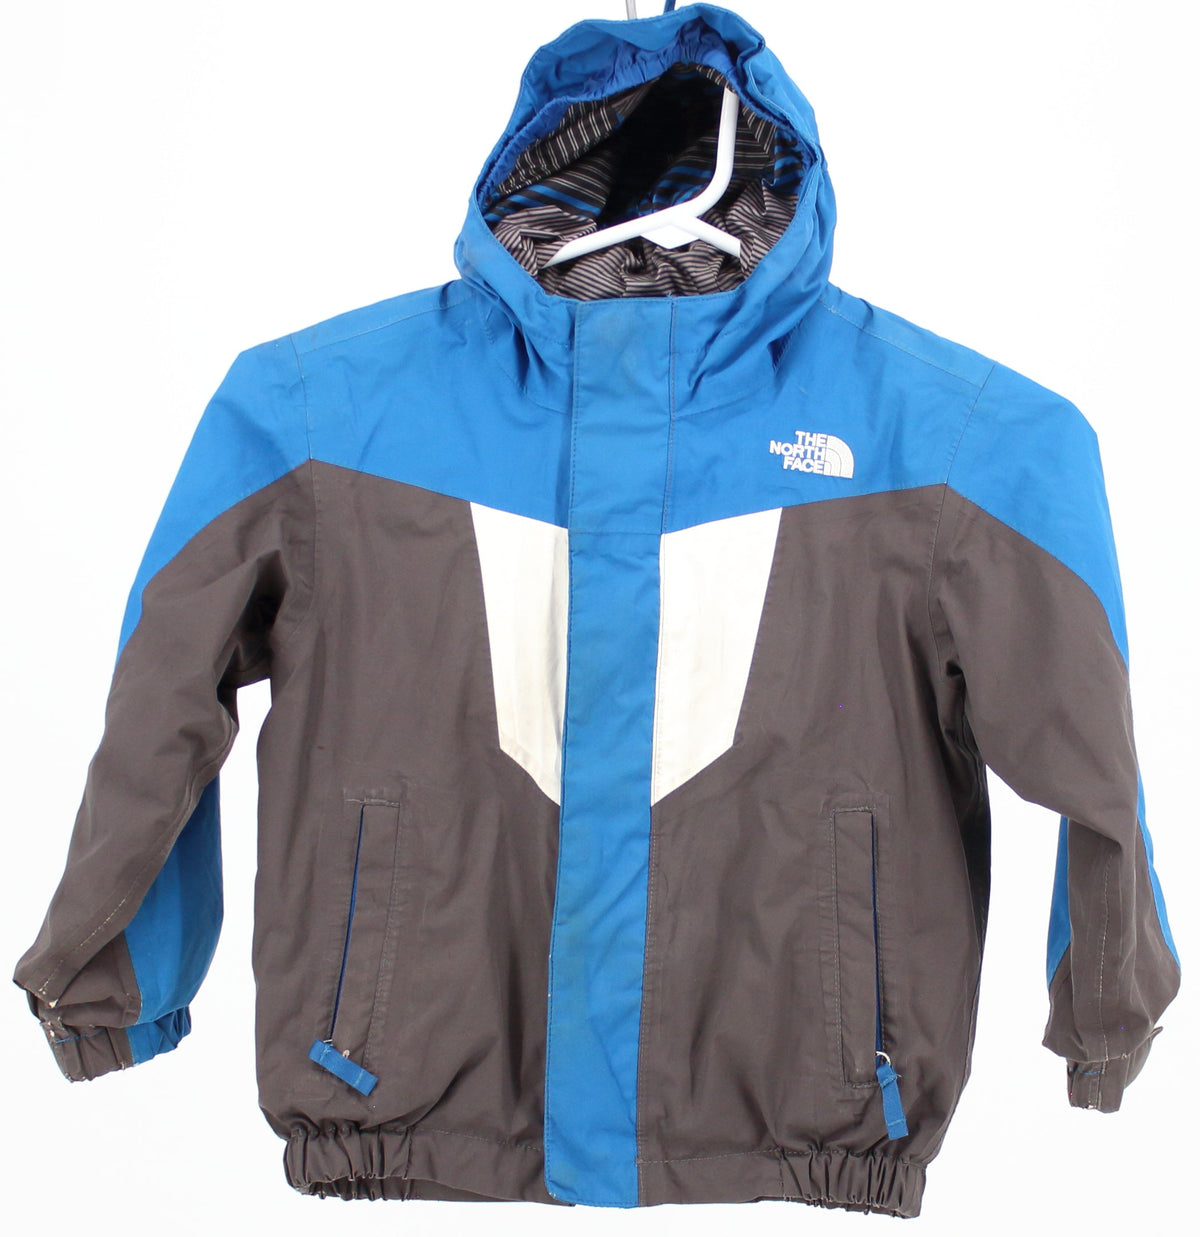 The North Face Blue Grey and White Rain Jacket